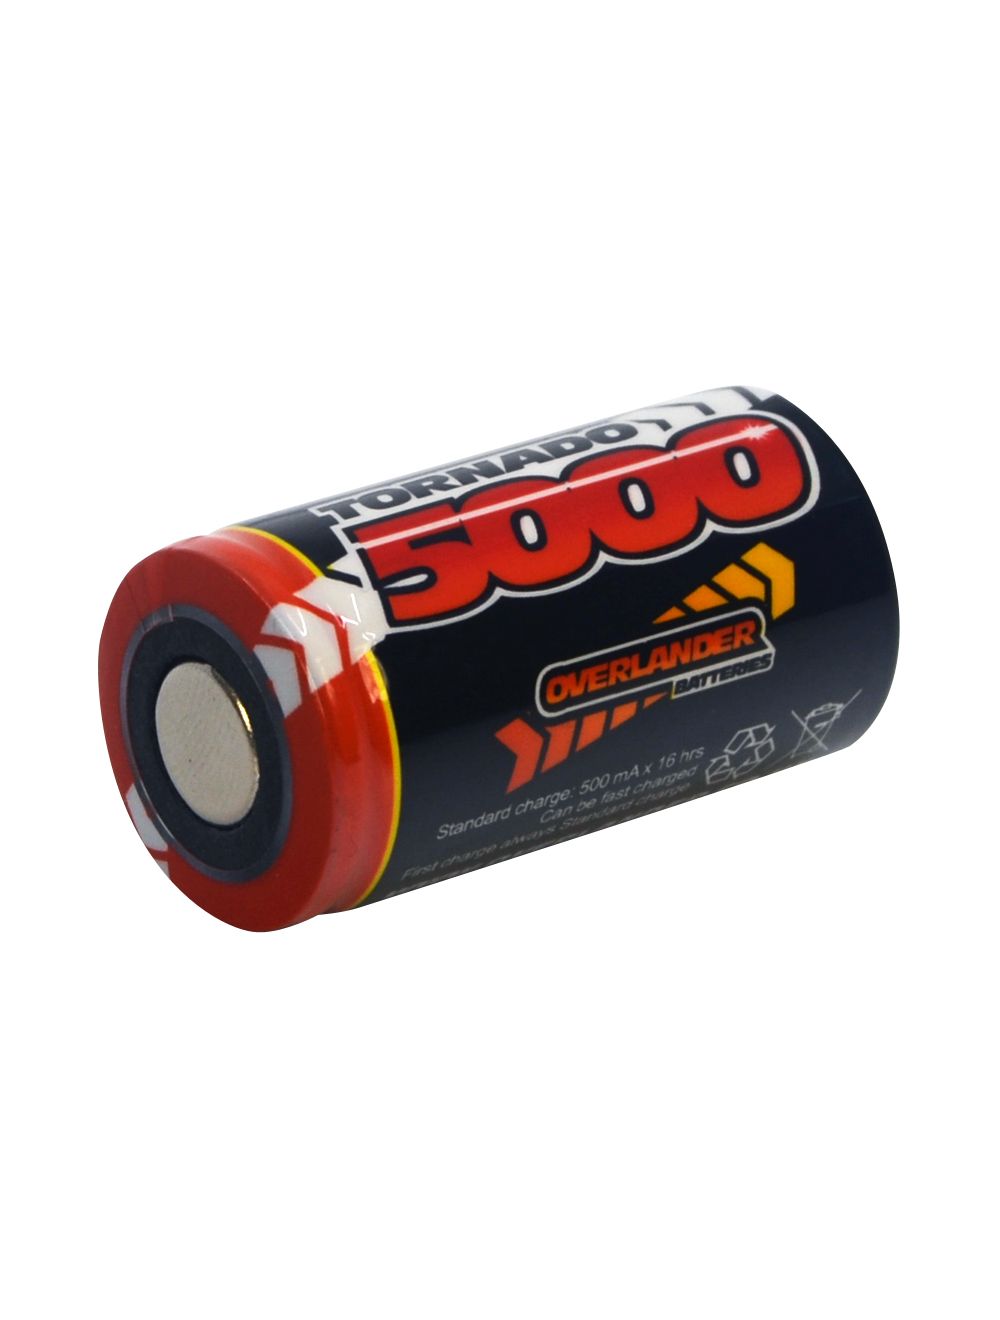 Overlander SubC 5000mAh 1.2V NiMH Cell - Tagged 1599